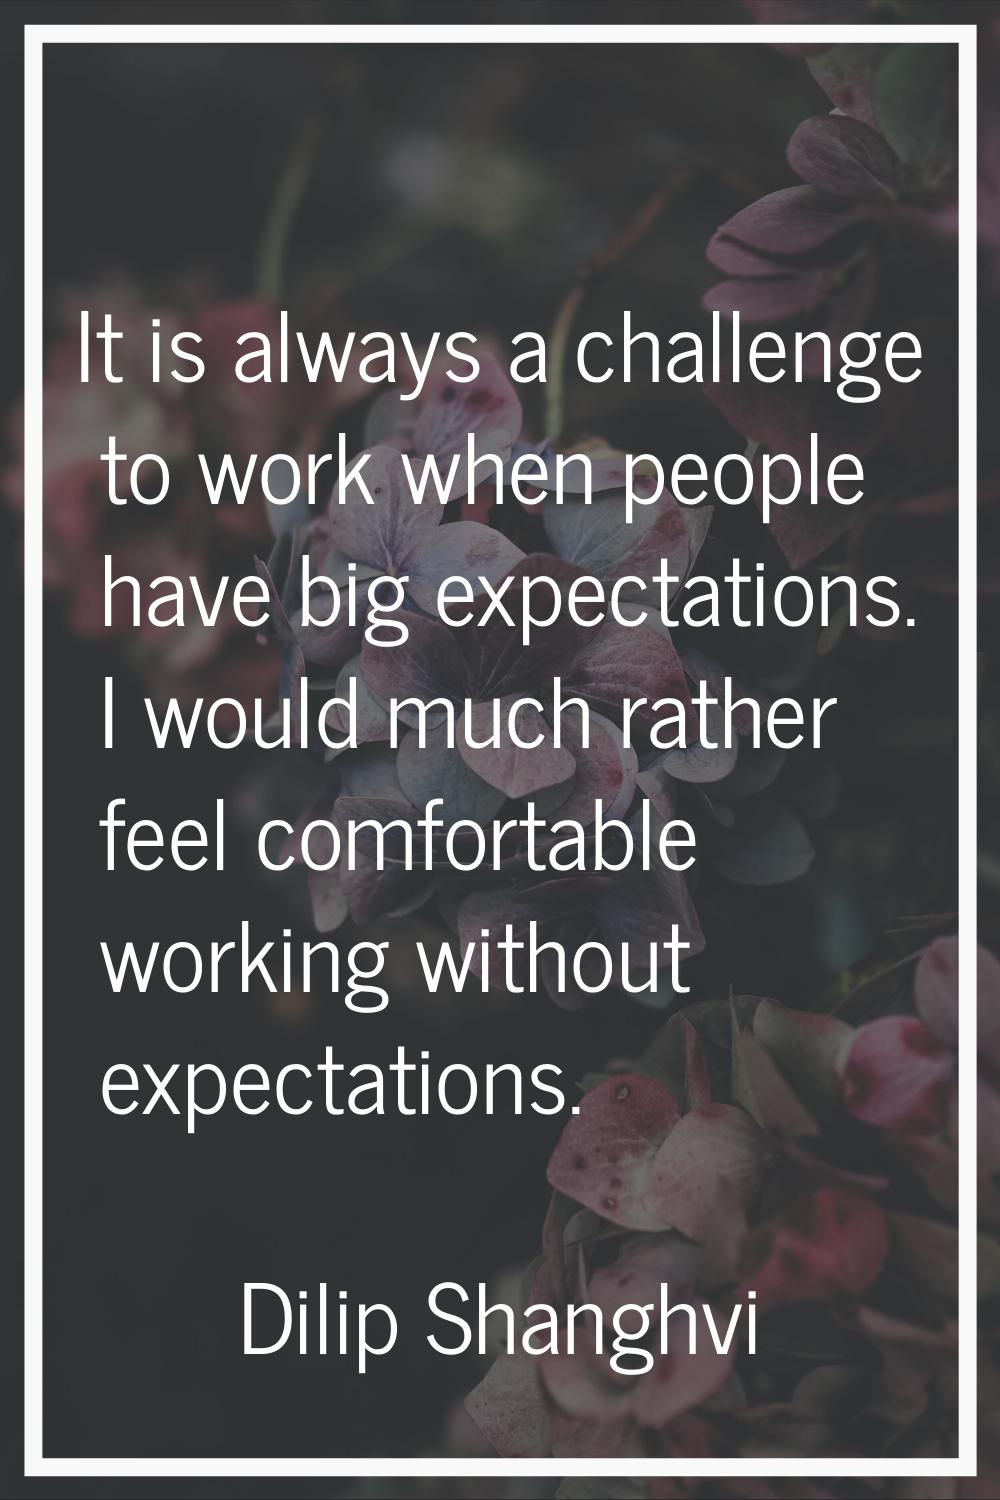 It is always a challenge to work when people have big expectations. I would much rather feel comfor